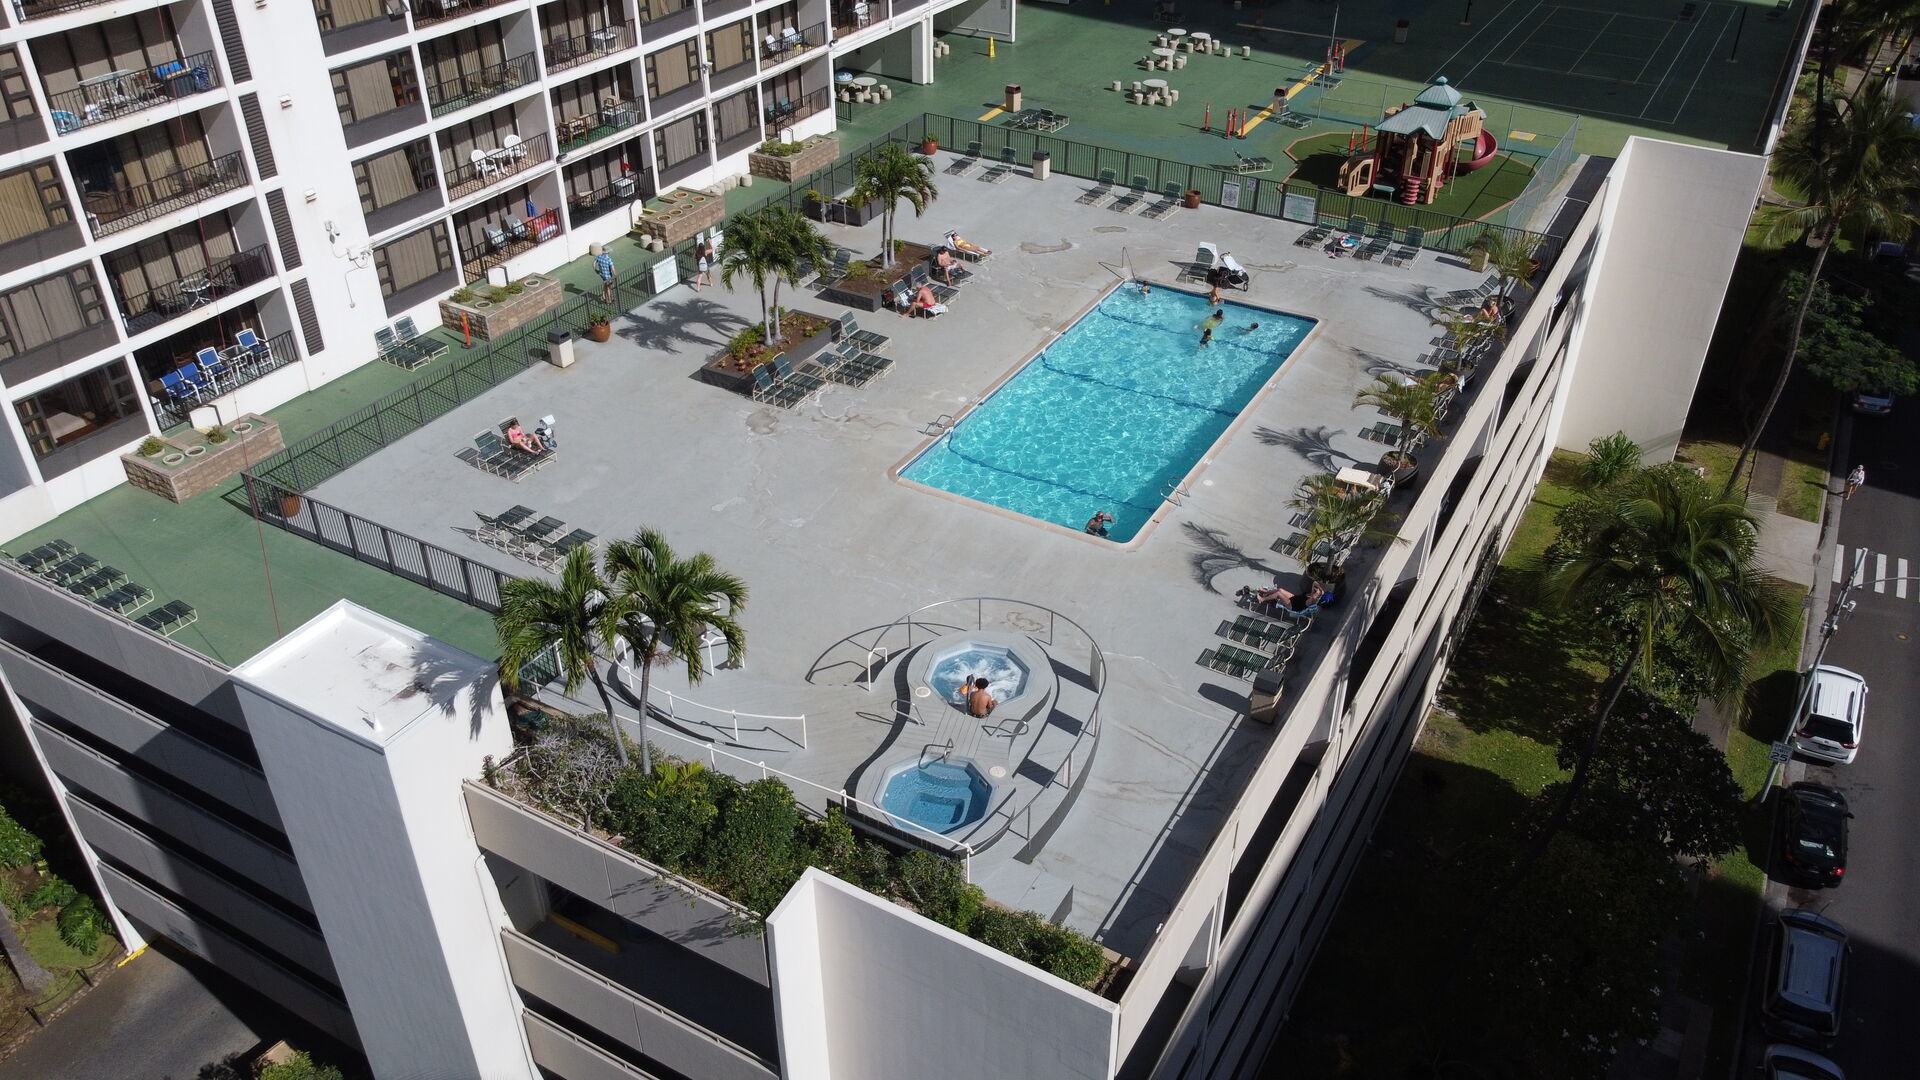 6th floor recreation area complete with pool, hot tub, sun loungers, BBQ area, and playground